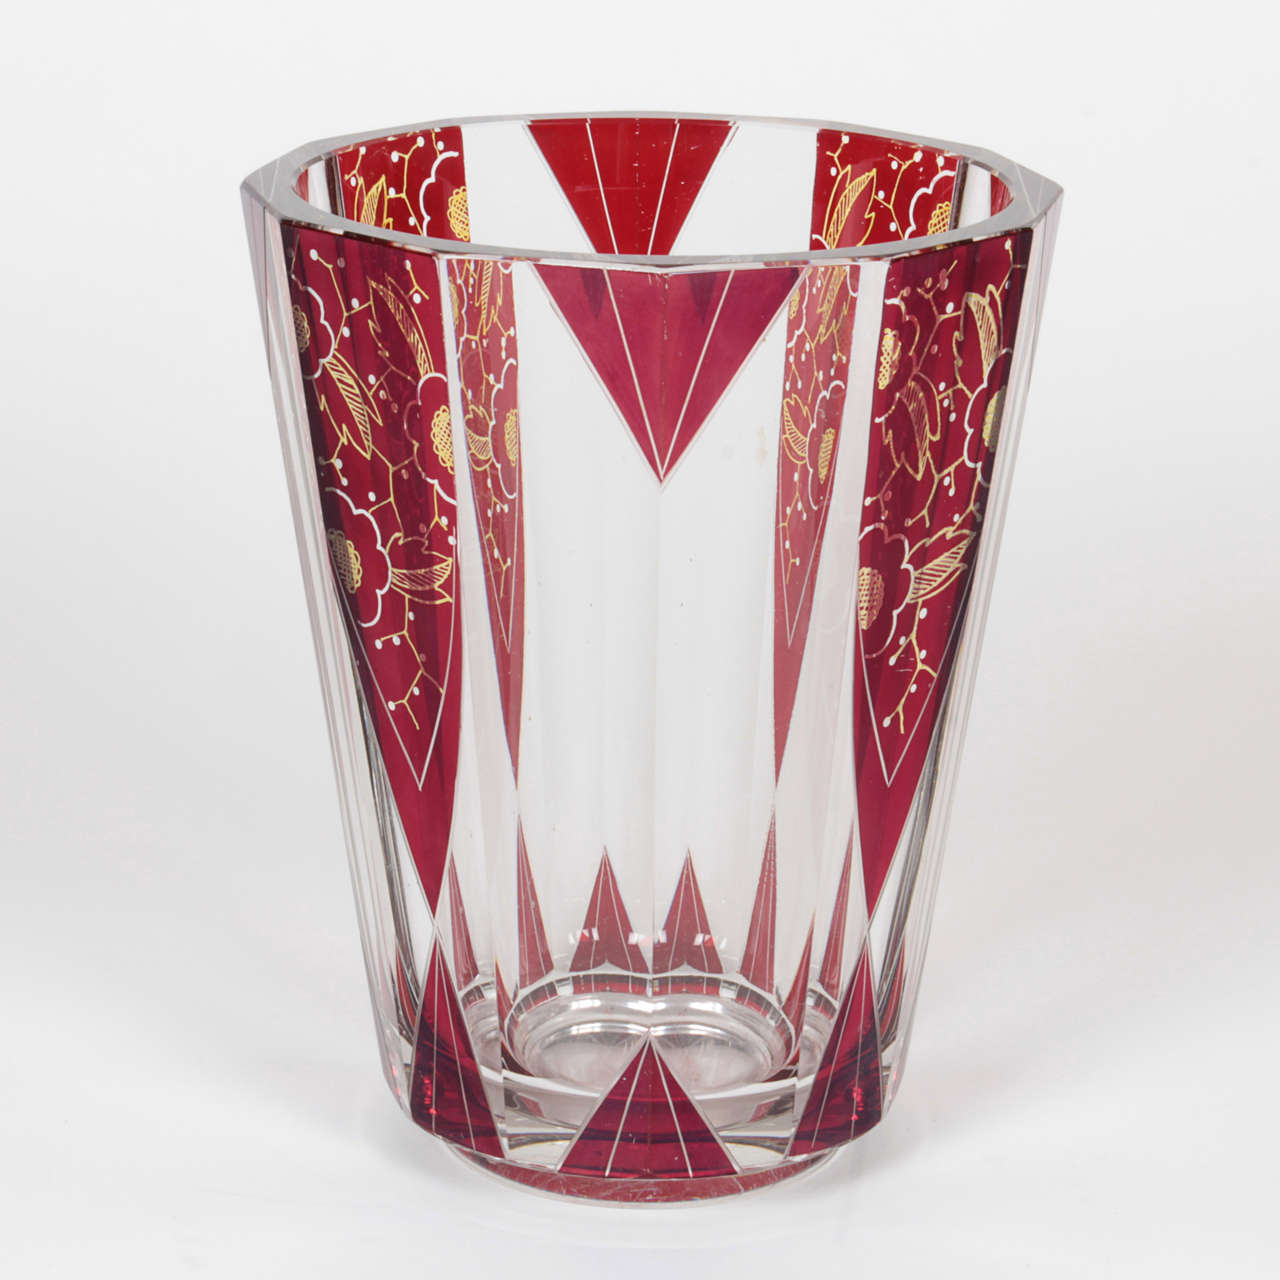 Vintage Czech Art Deco clear and ruby vase in striking pattern. Multifaceted piece has rare red coloring with gold detail.